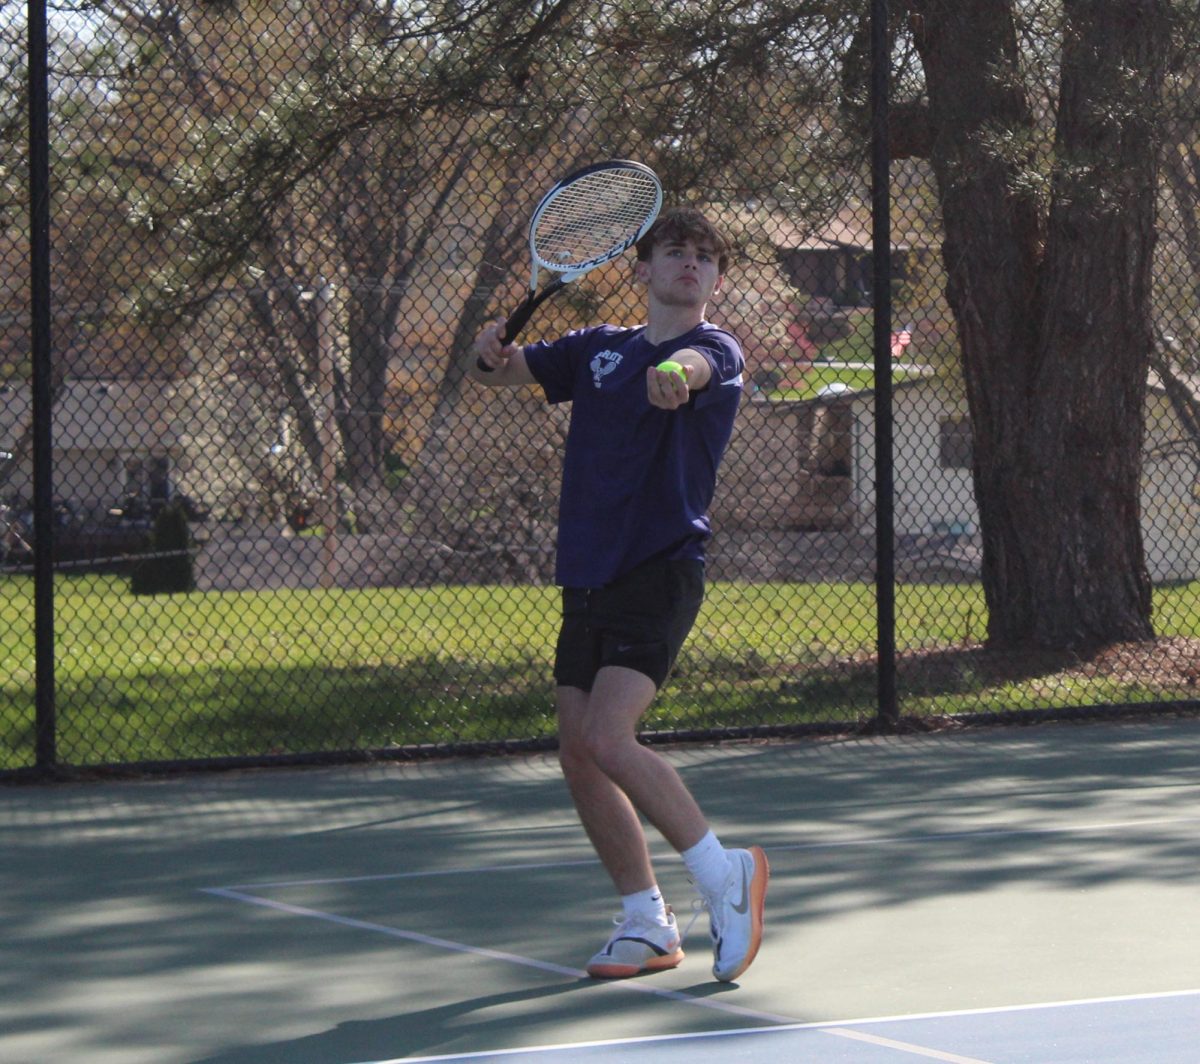 Owen Cross gets ready to serve the ball